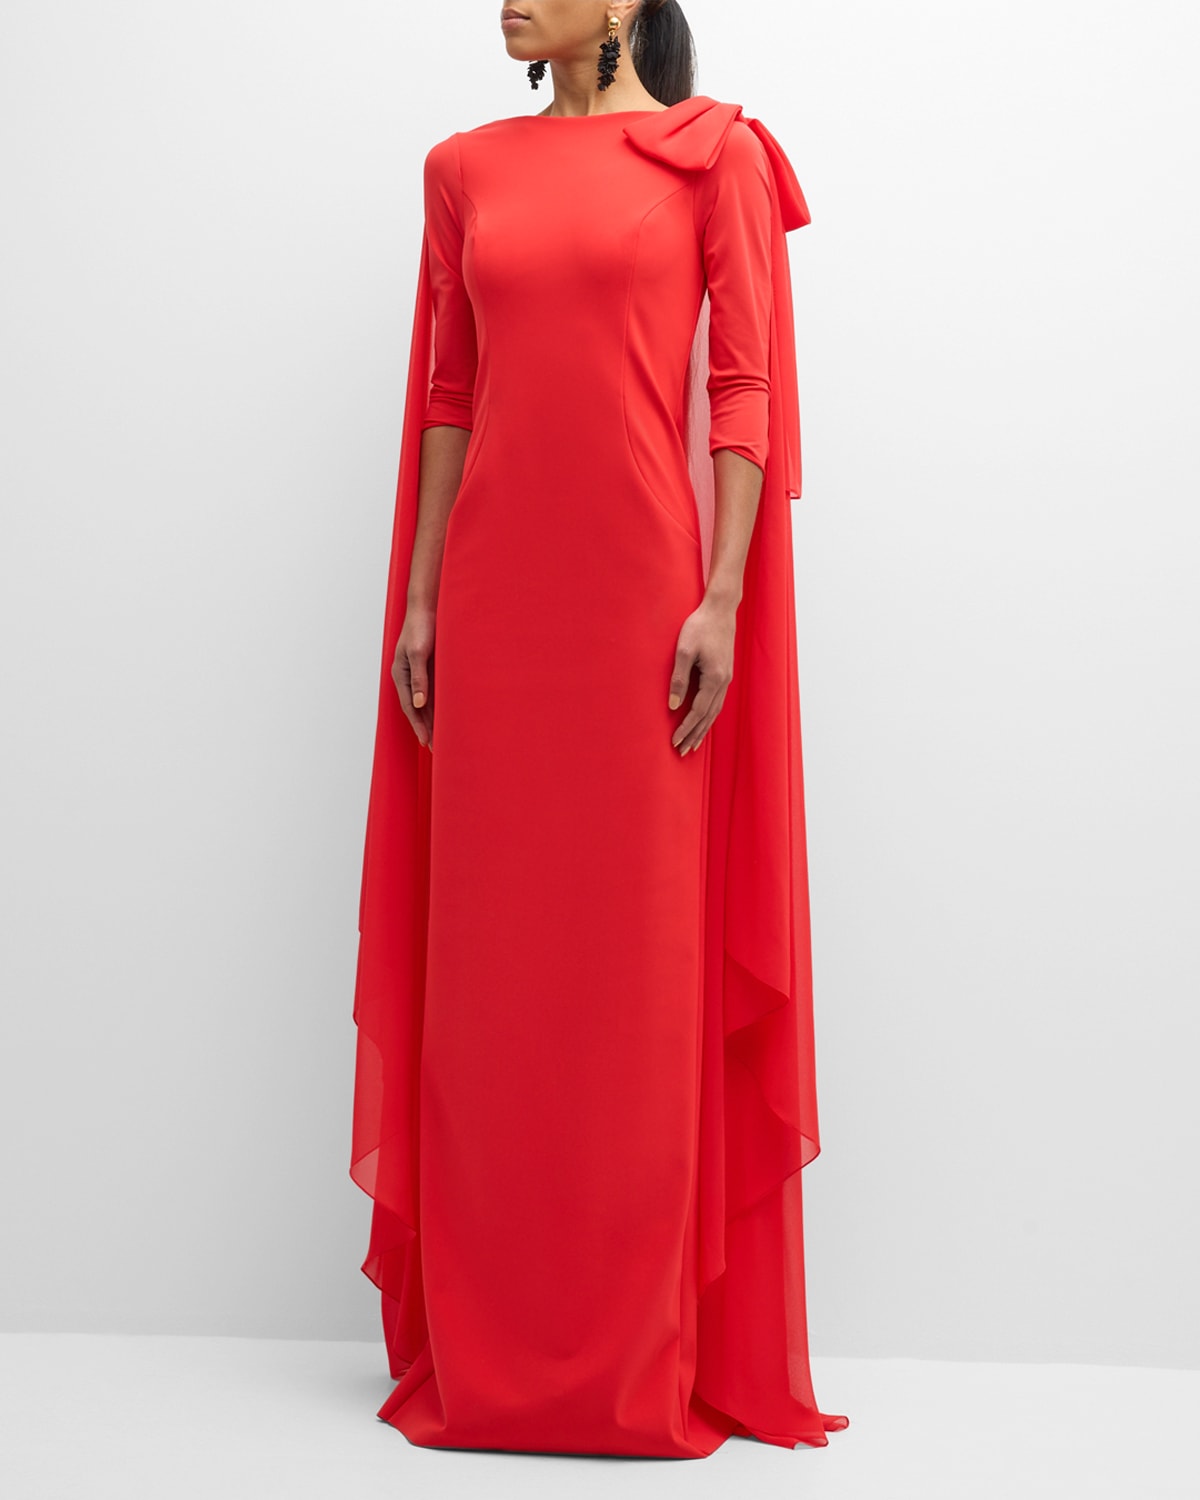 Rickie Freeman For Teri Jon Bow Column Cape Gown In Red